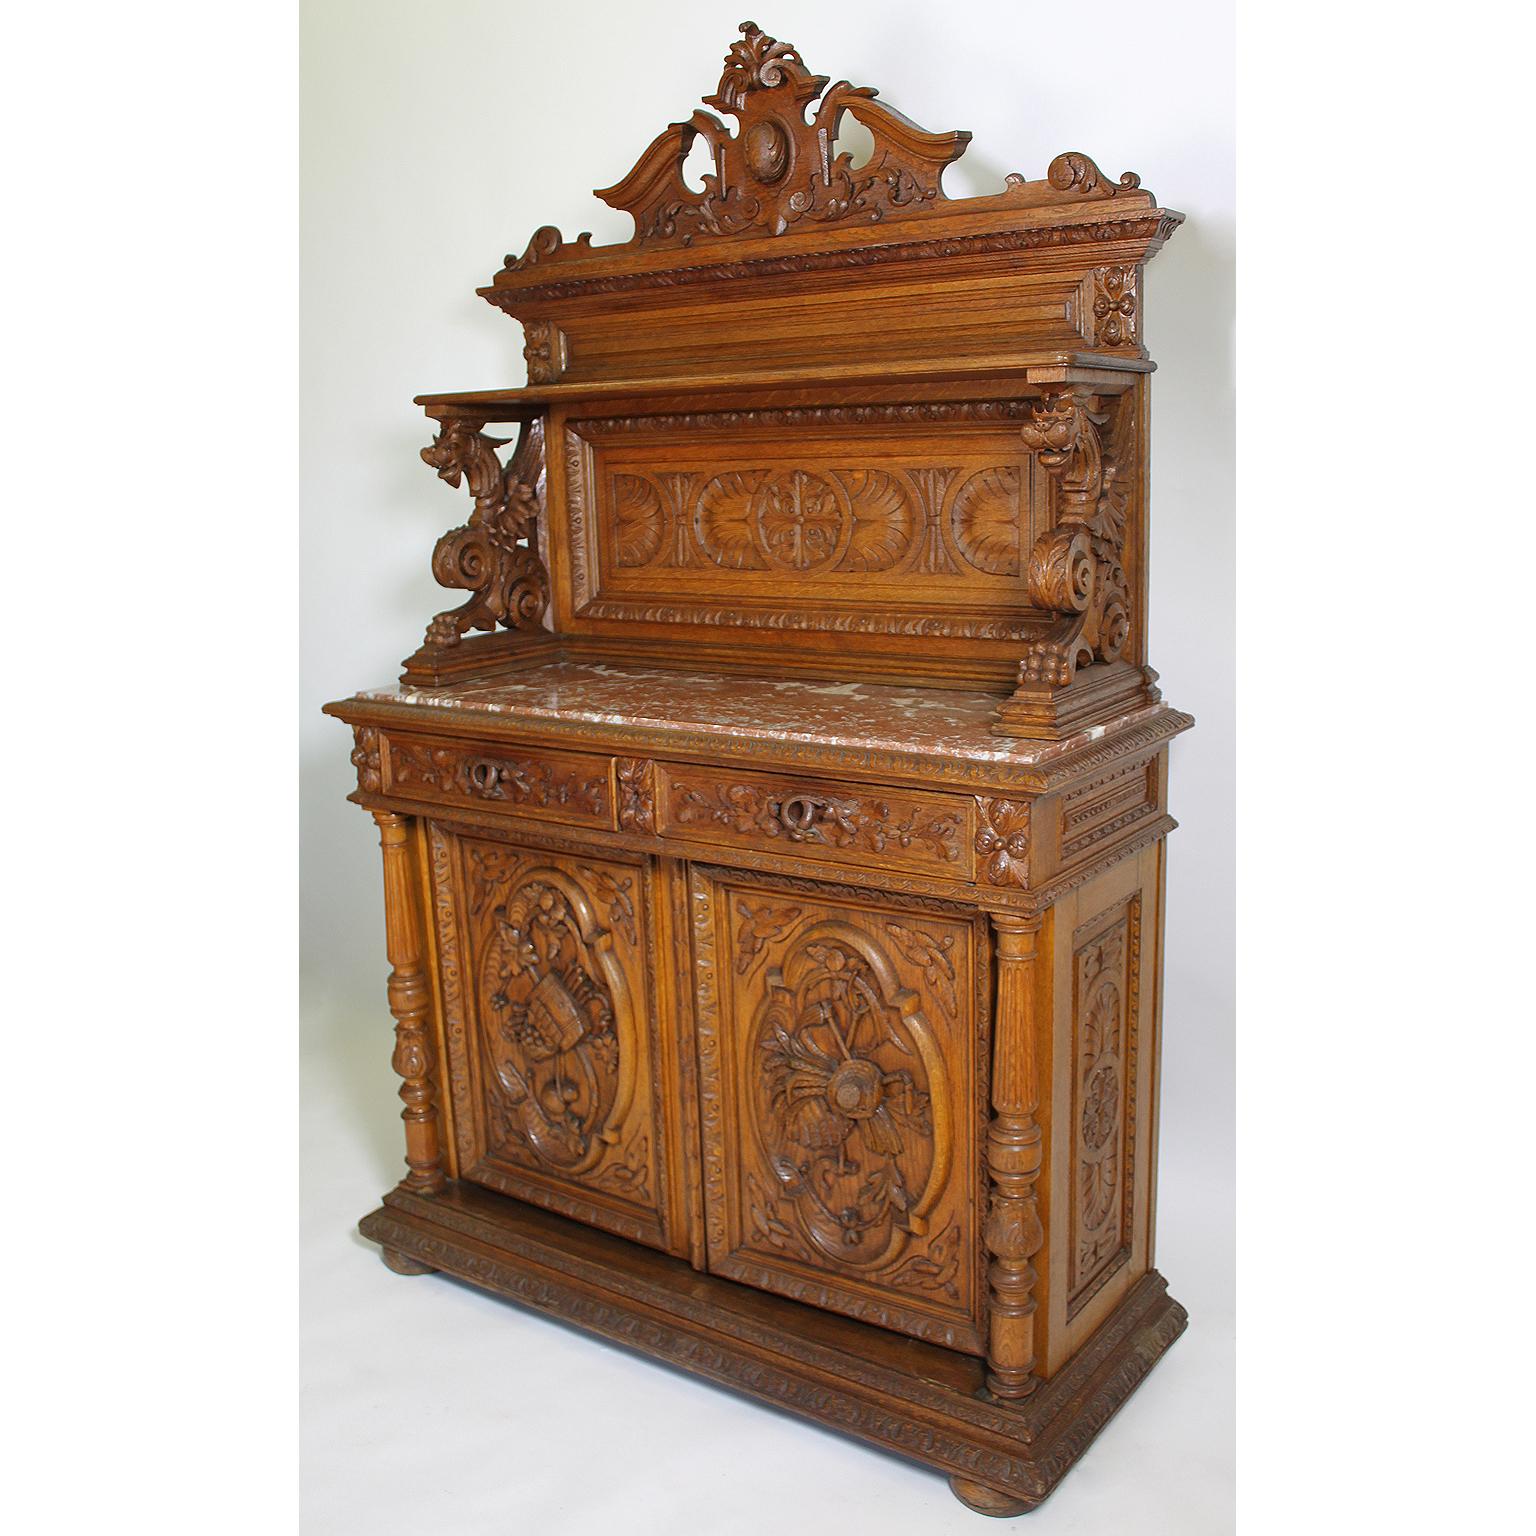 A fine and rare Italian 19th century Baroque Renaissance Revival style oak-carved figural server cabinet. The upper part crowned with an architectural carving above a paneled shelf, surmounted on each side with a figure of winged dragons, all above